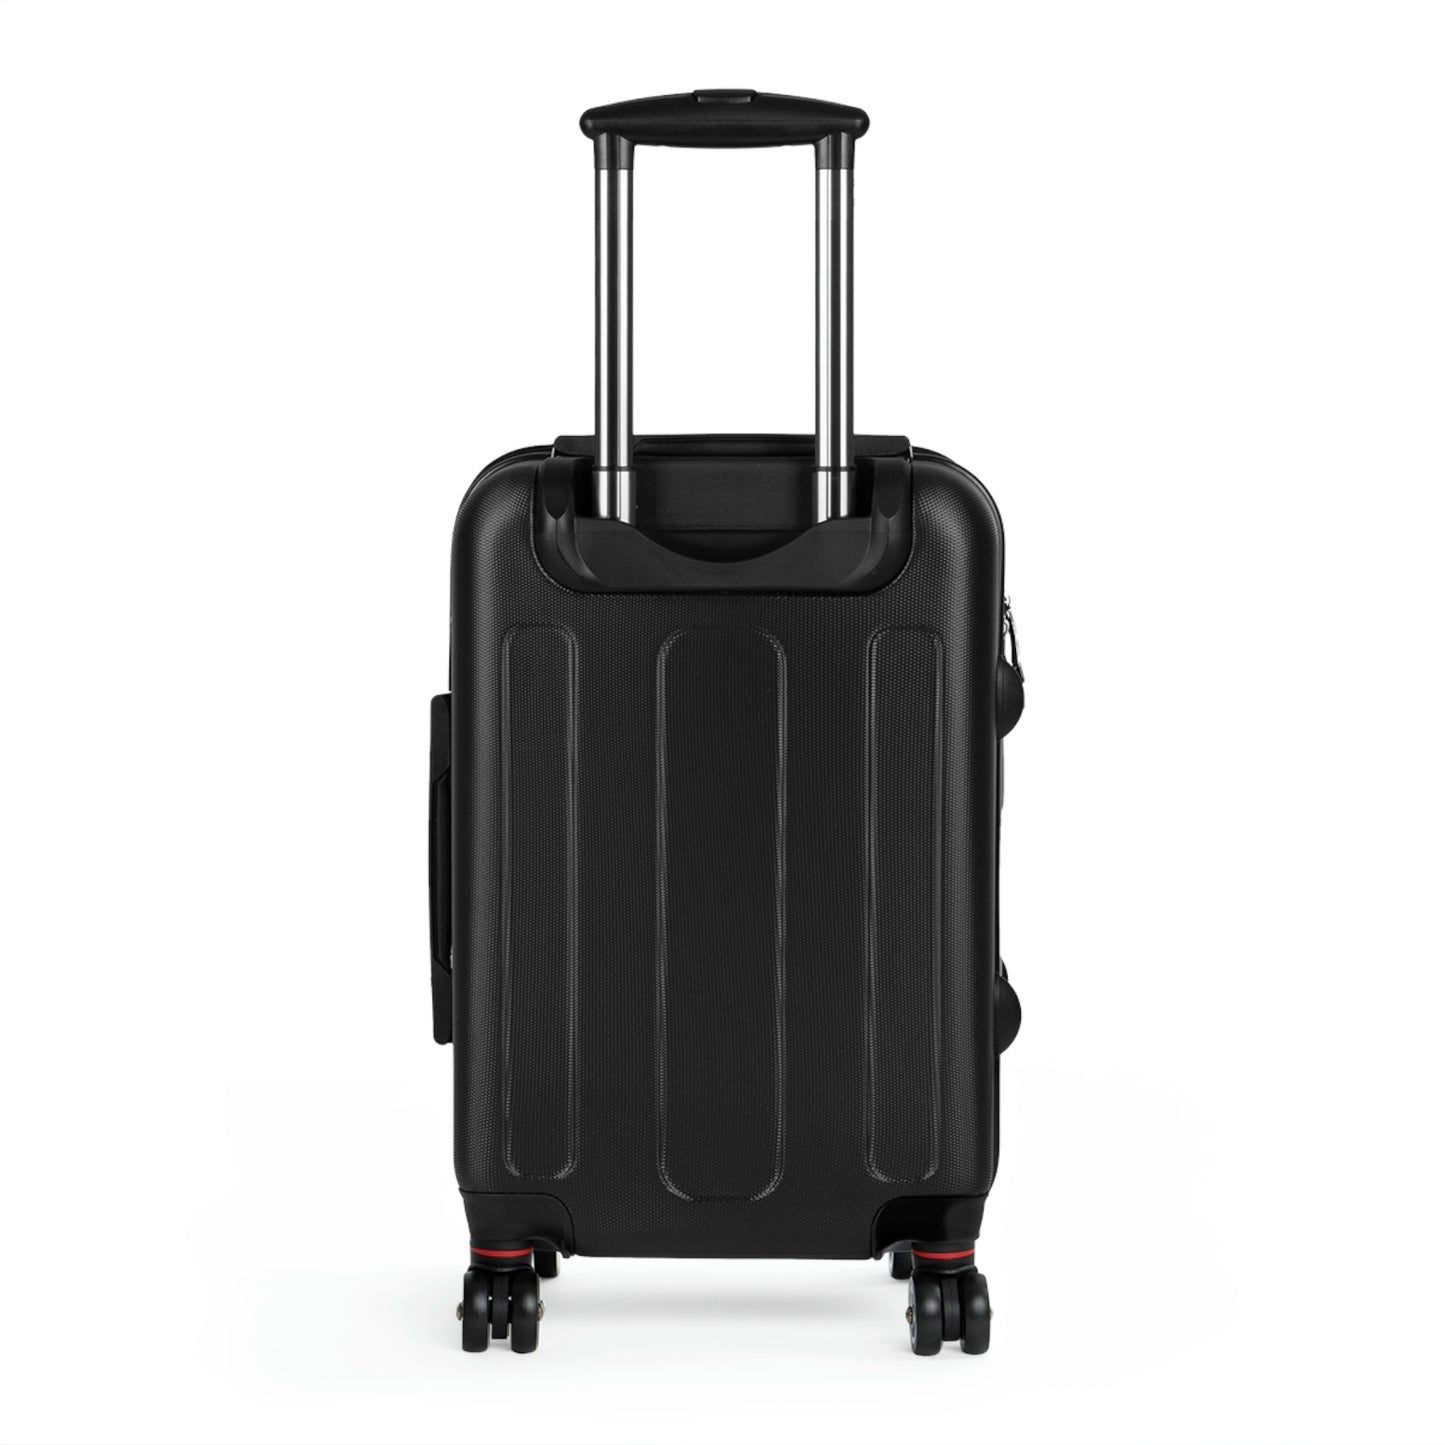 Houte Couture Hummingbird- Carry on Suitcase